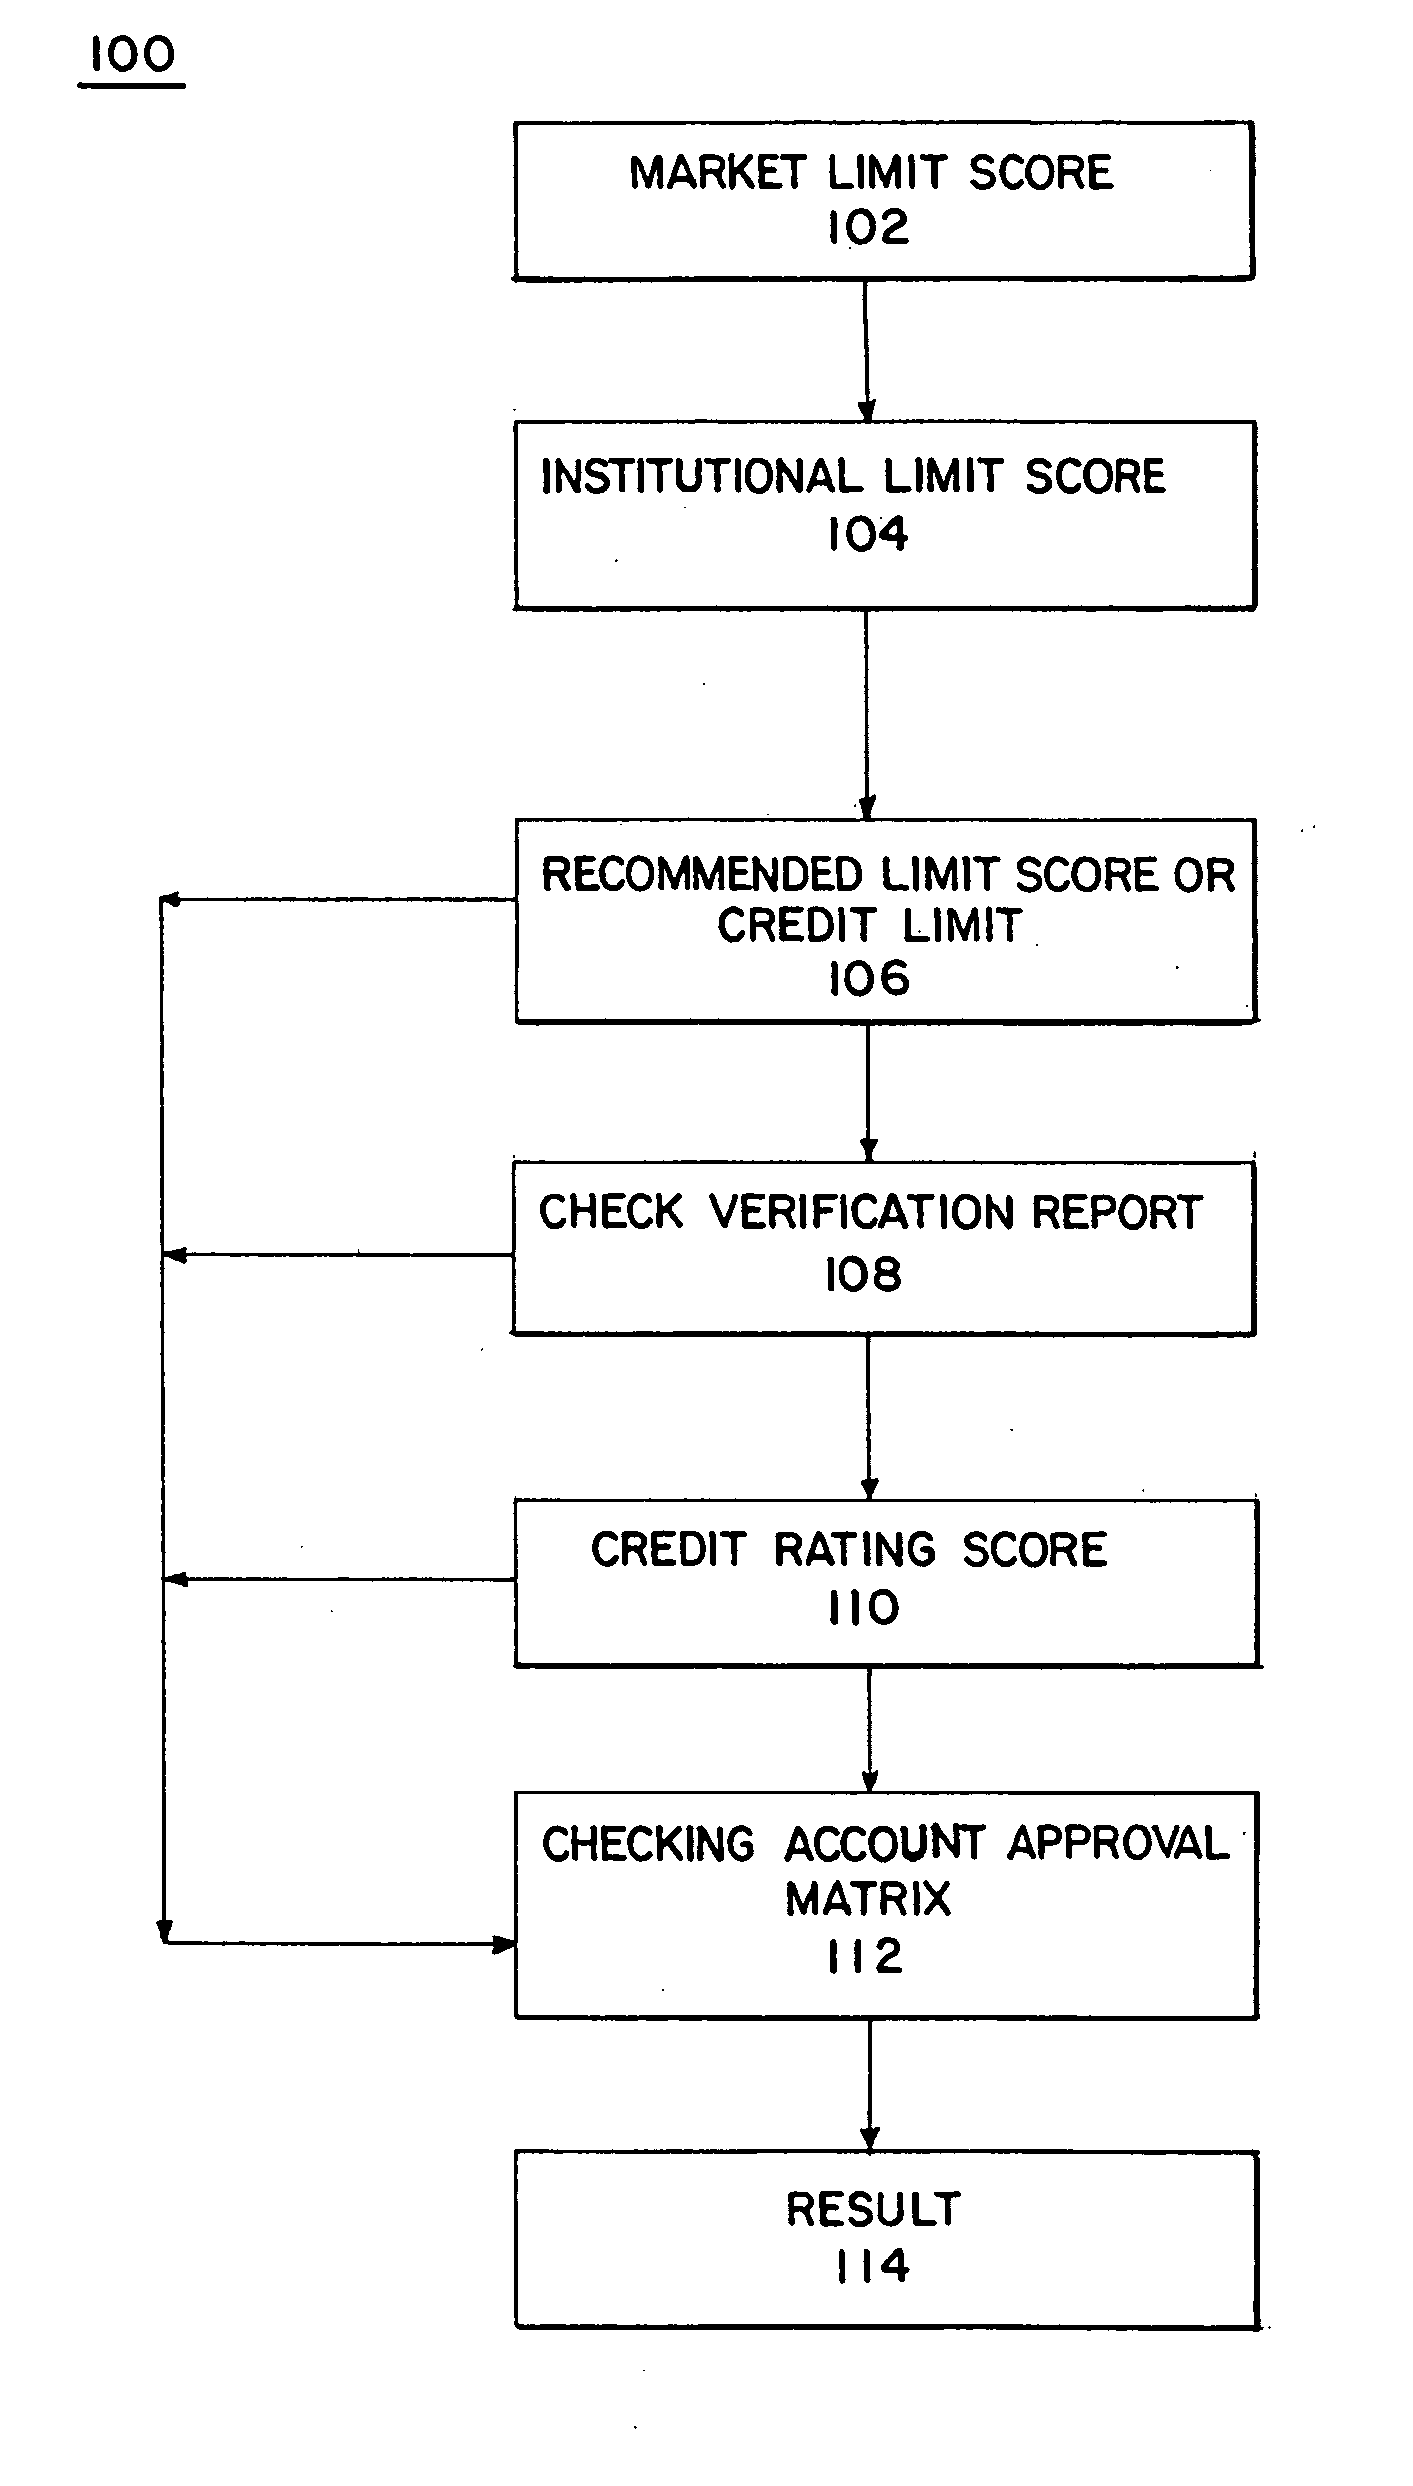 Risk identification system and methods